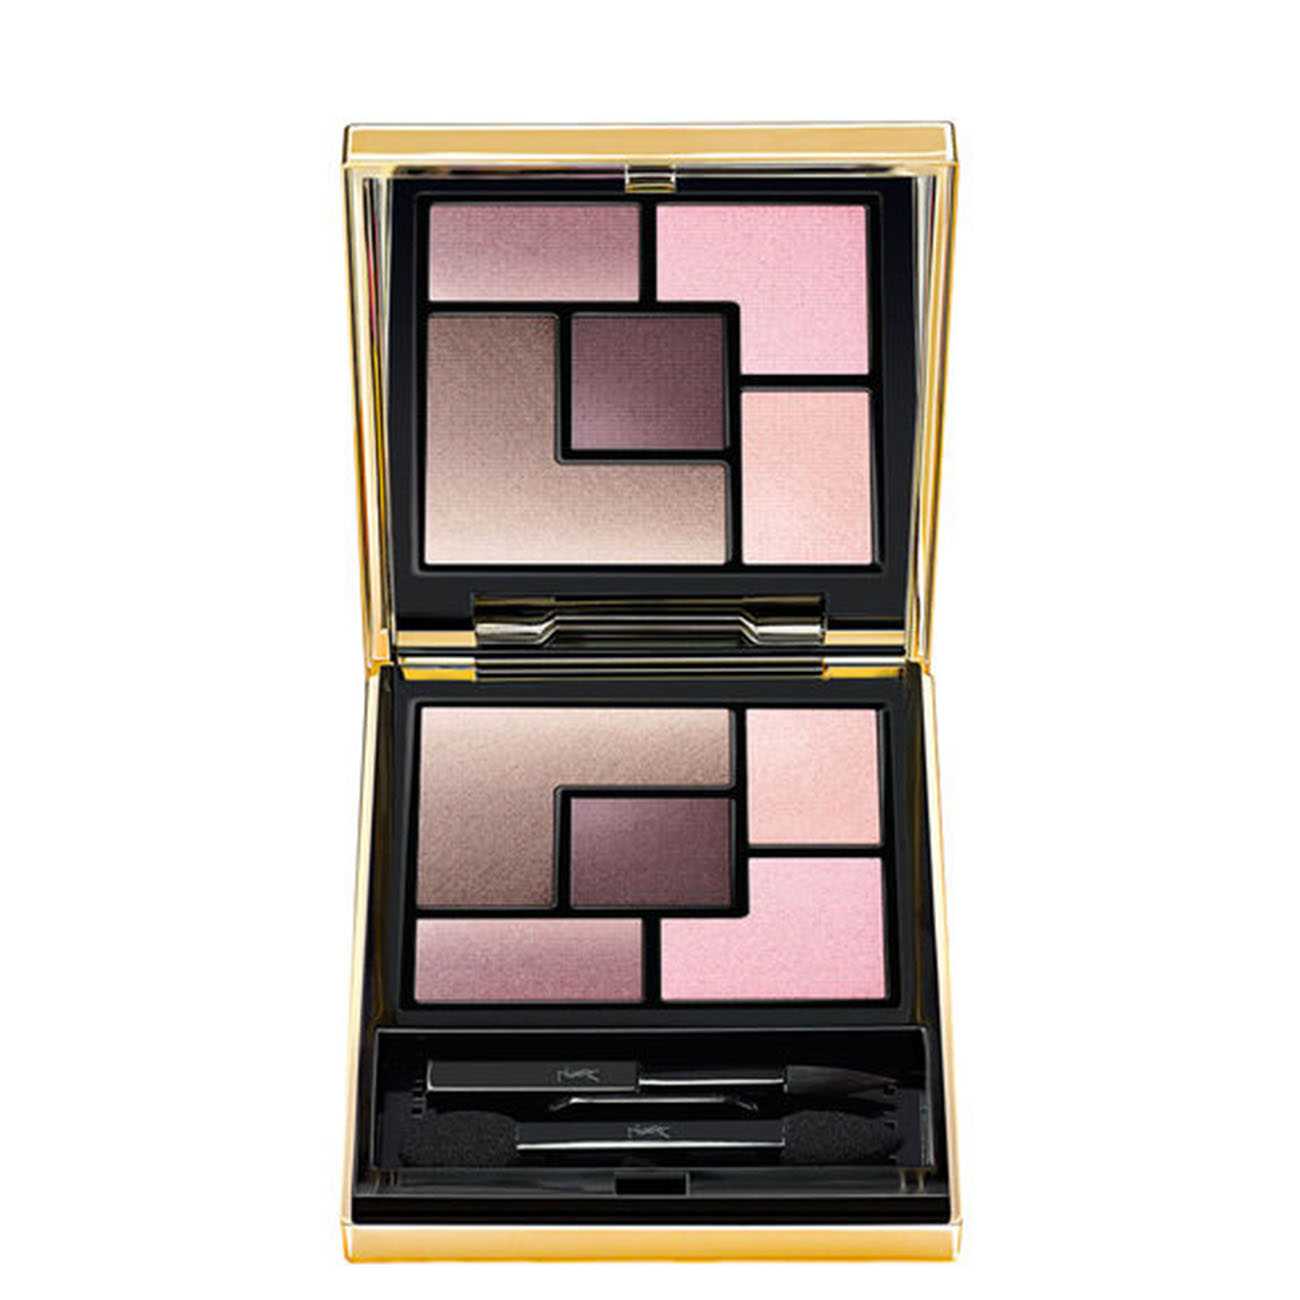 COUTURE EYE PALETTE 3 G